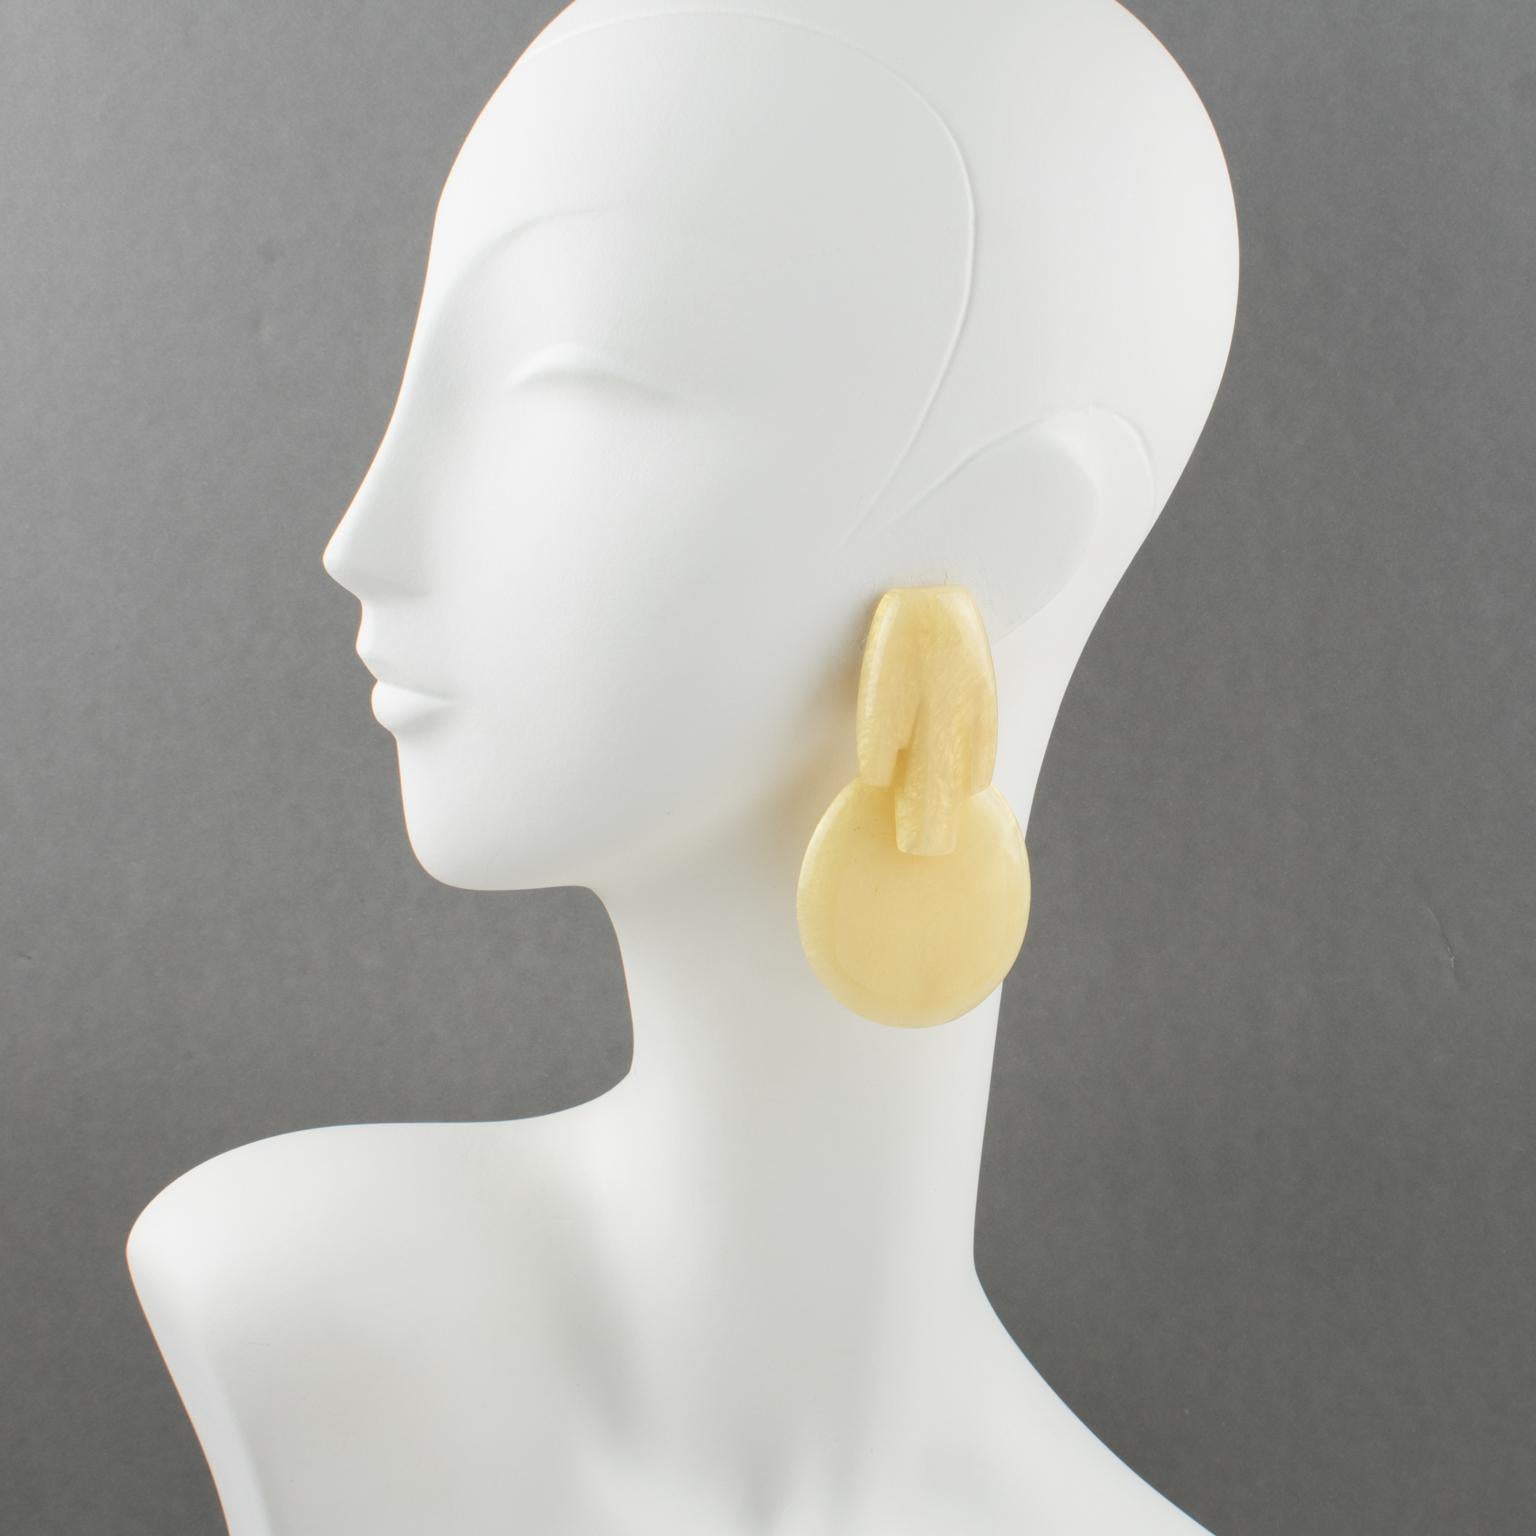 These stunning artisan studio hand-crafted modernist resin clip-on earrings were created by Marie Therese and Christian Migeon, known as Migeon & Migeon. The oversized dangling shape with a futuristic design has in light banana pearlized color. The